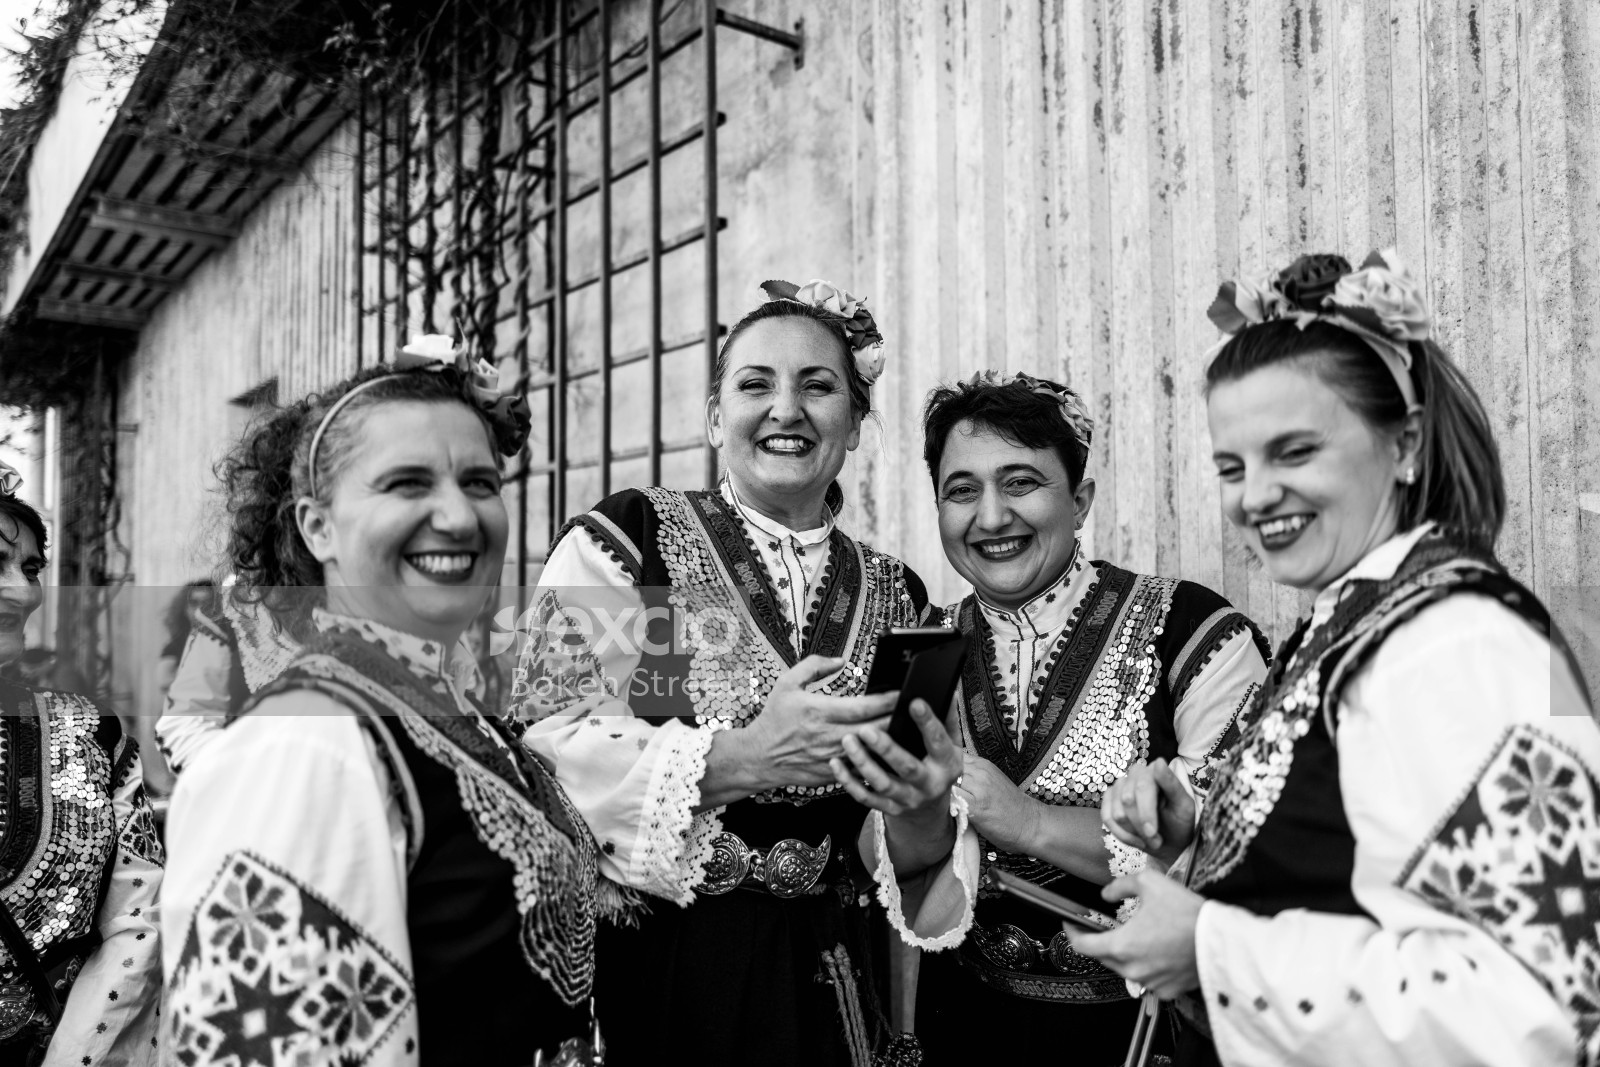 Ladies elegantly dressed in similar outfits posing at Newtown festival 2021 monochrome